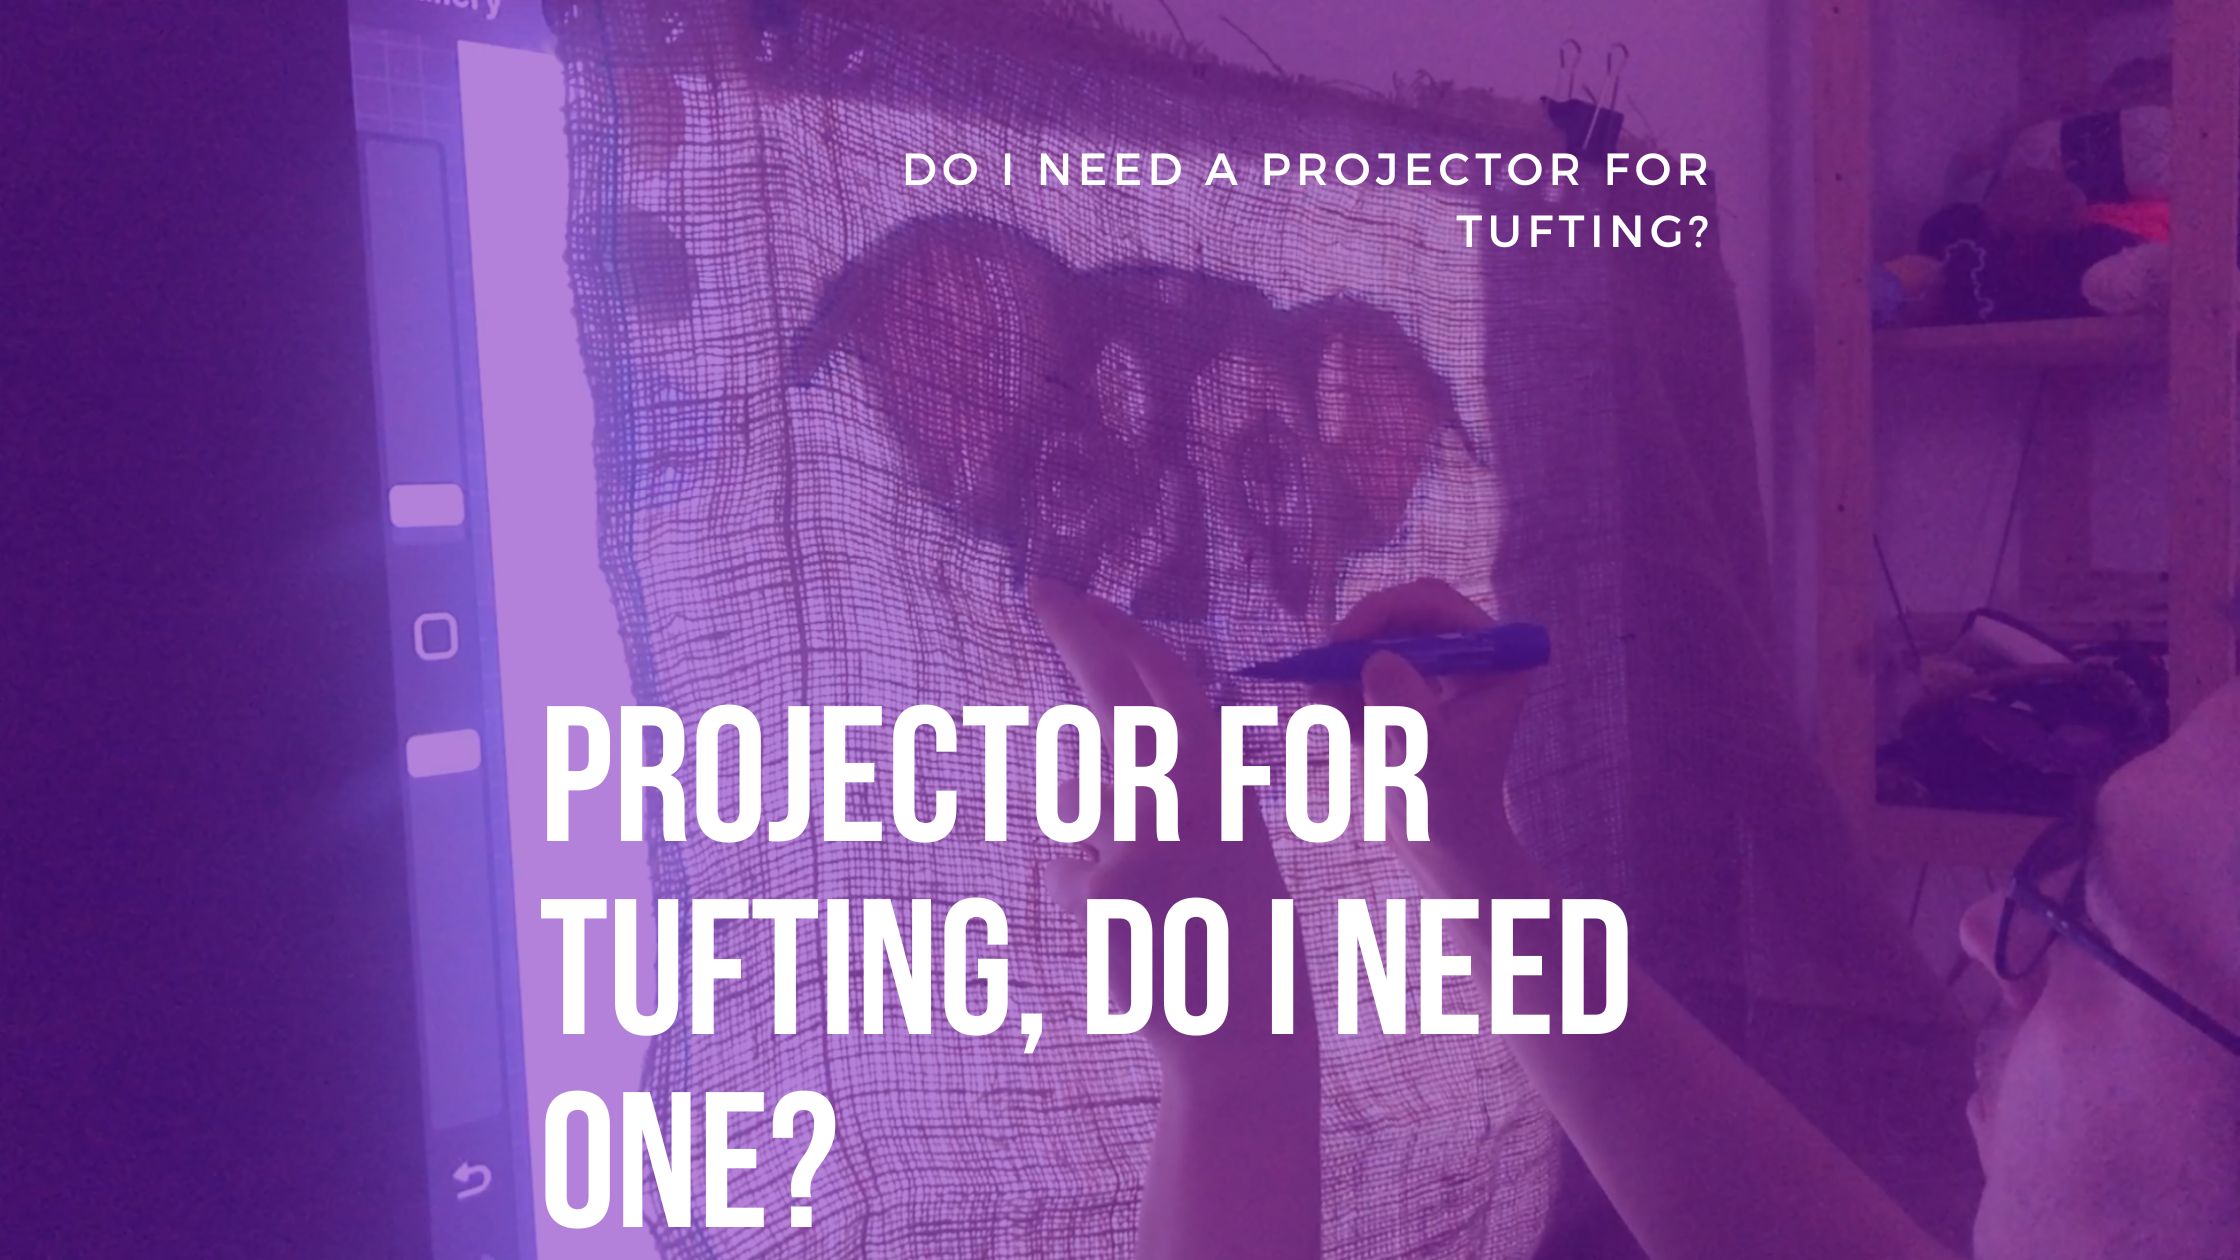 Projector For Tufting, Do I Need One?